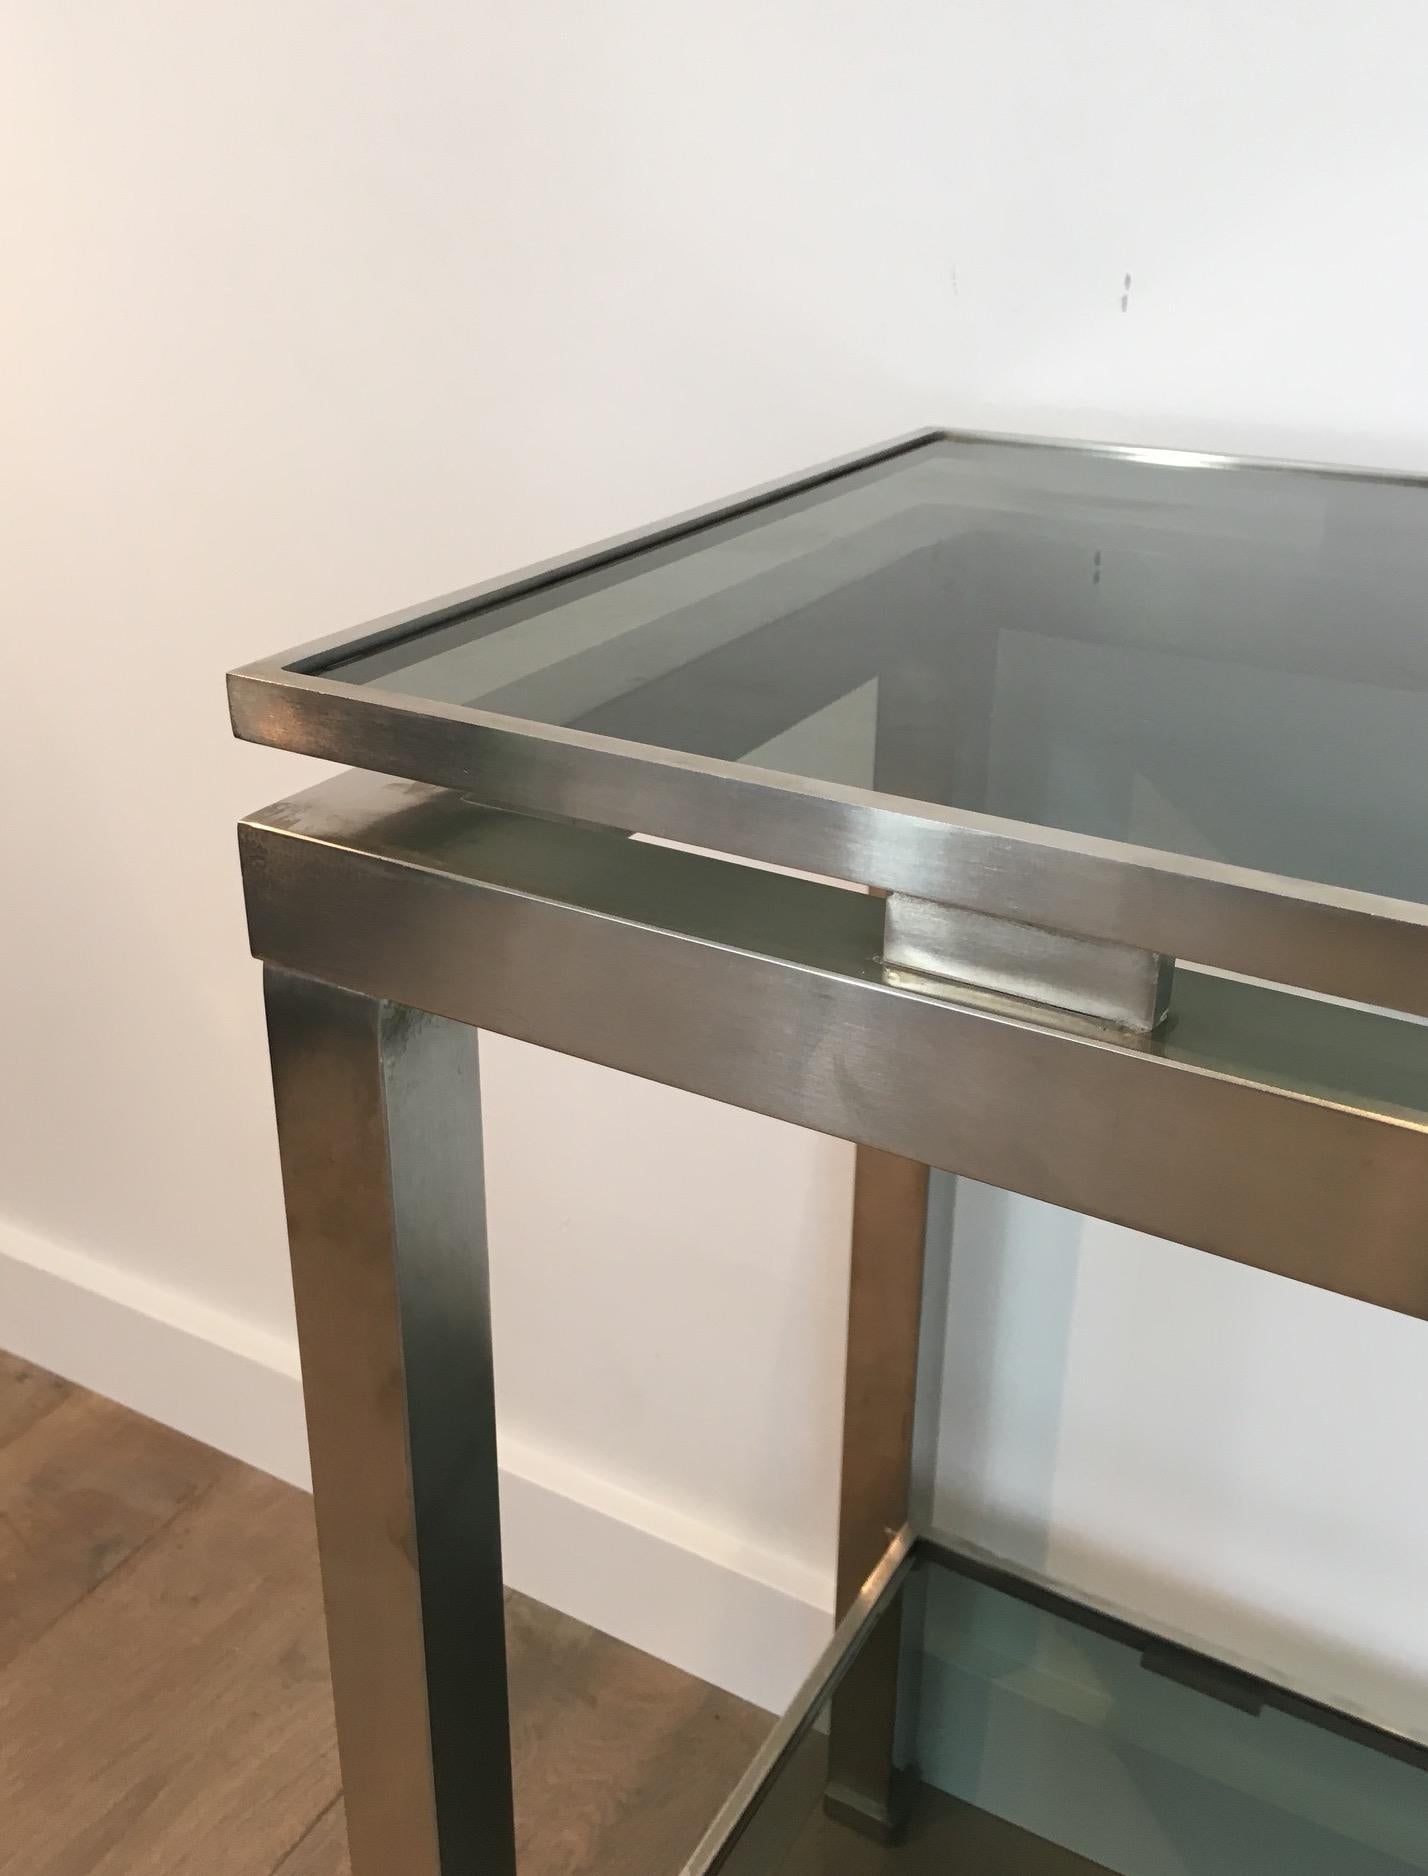 Late 20th Century Brushed Steel Console Table with Glass Tops, by Guy Lefèvre for Maison Jansen For Sale